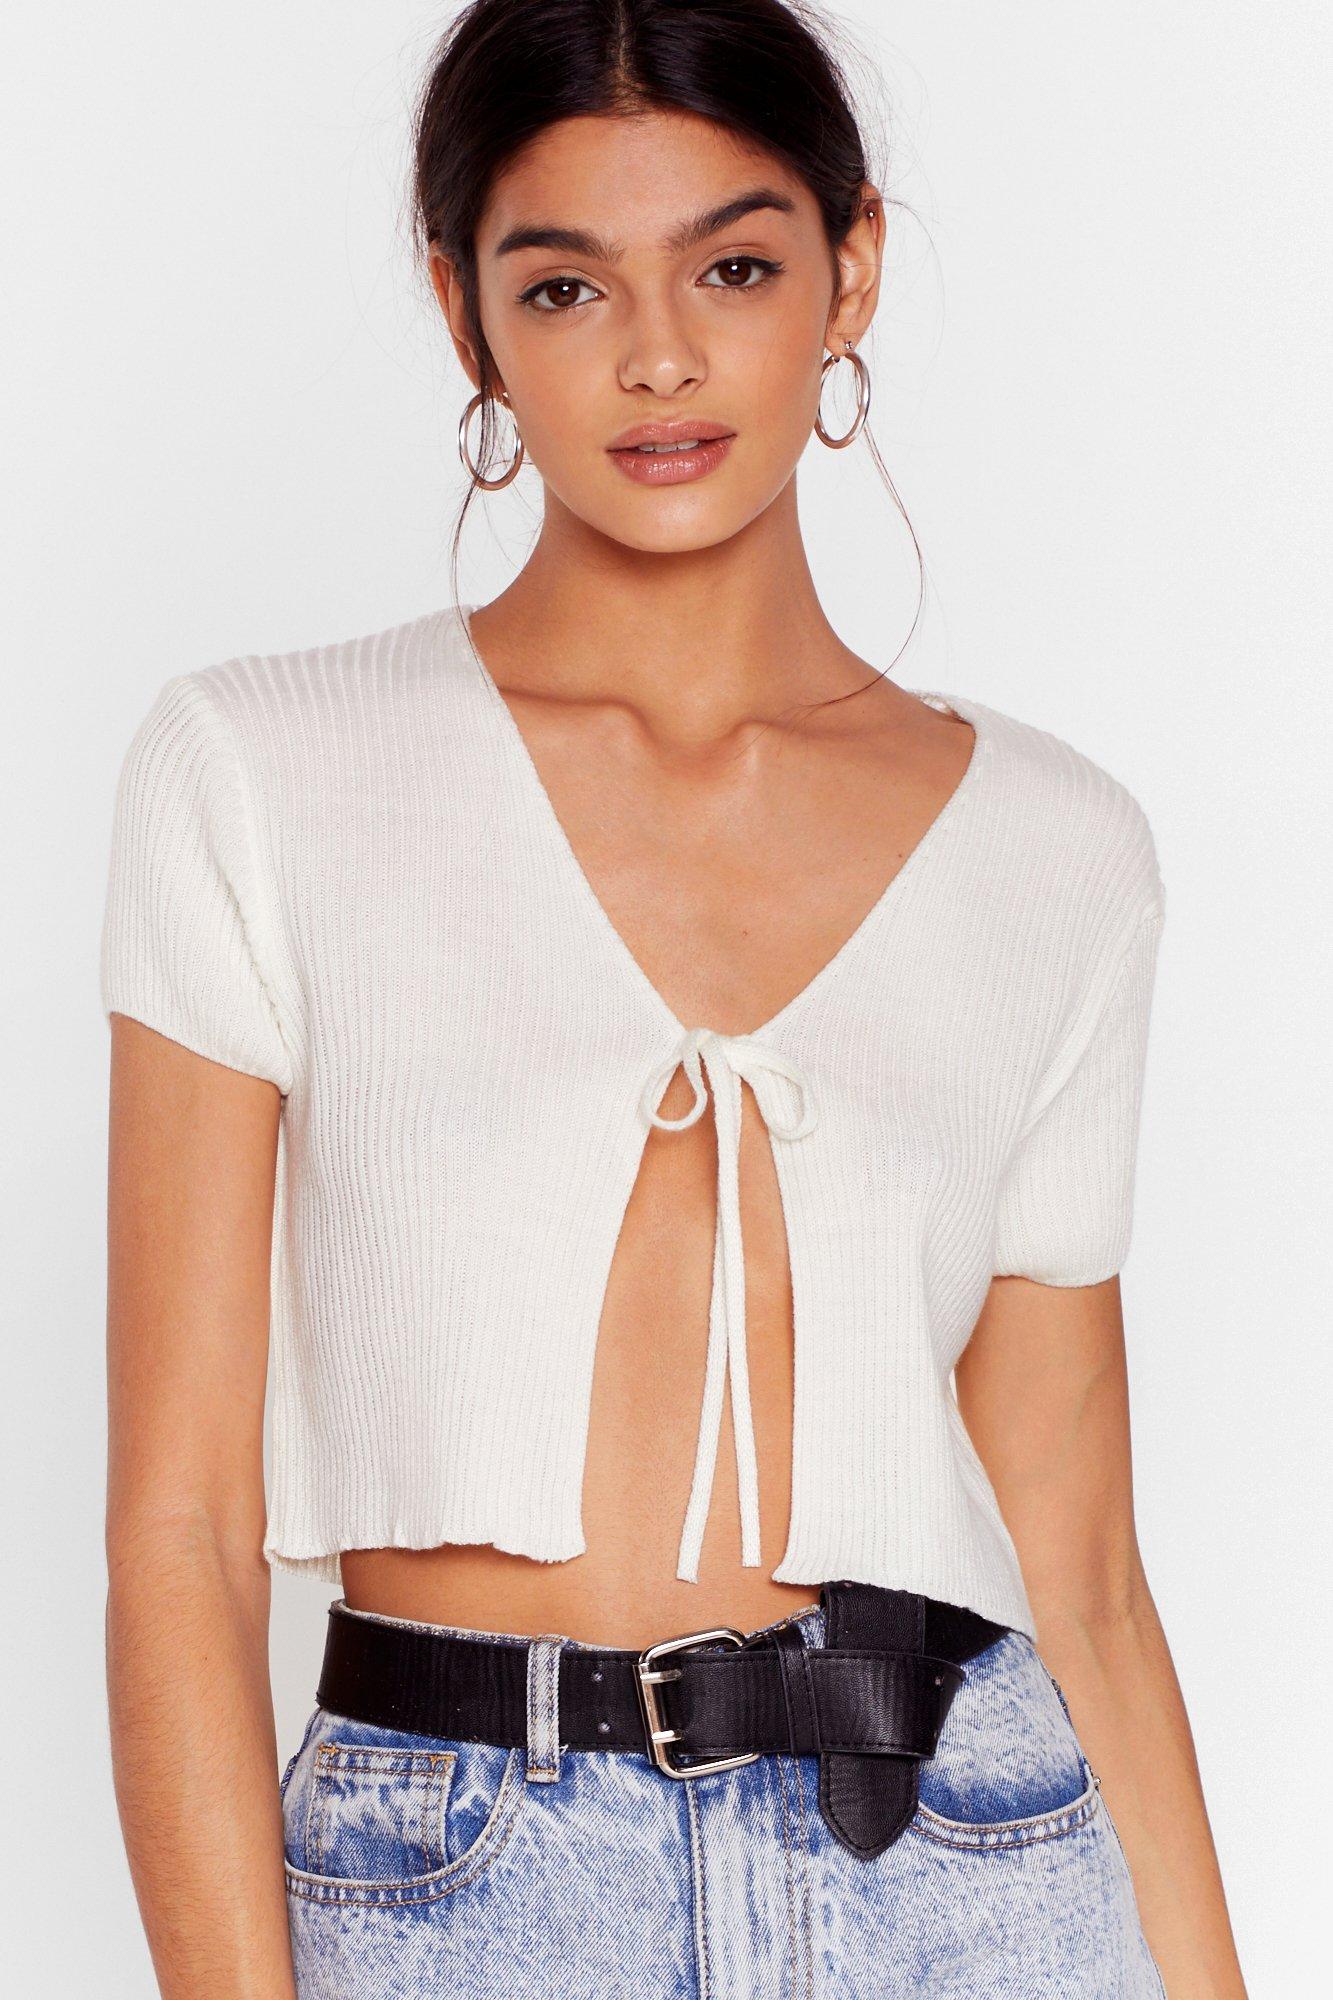 cropped knit